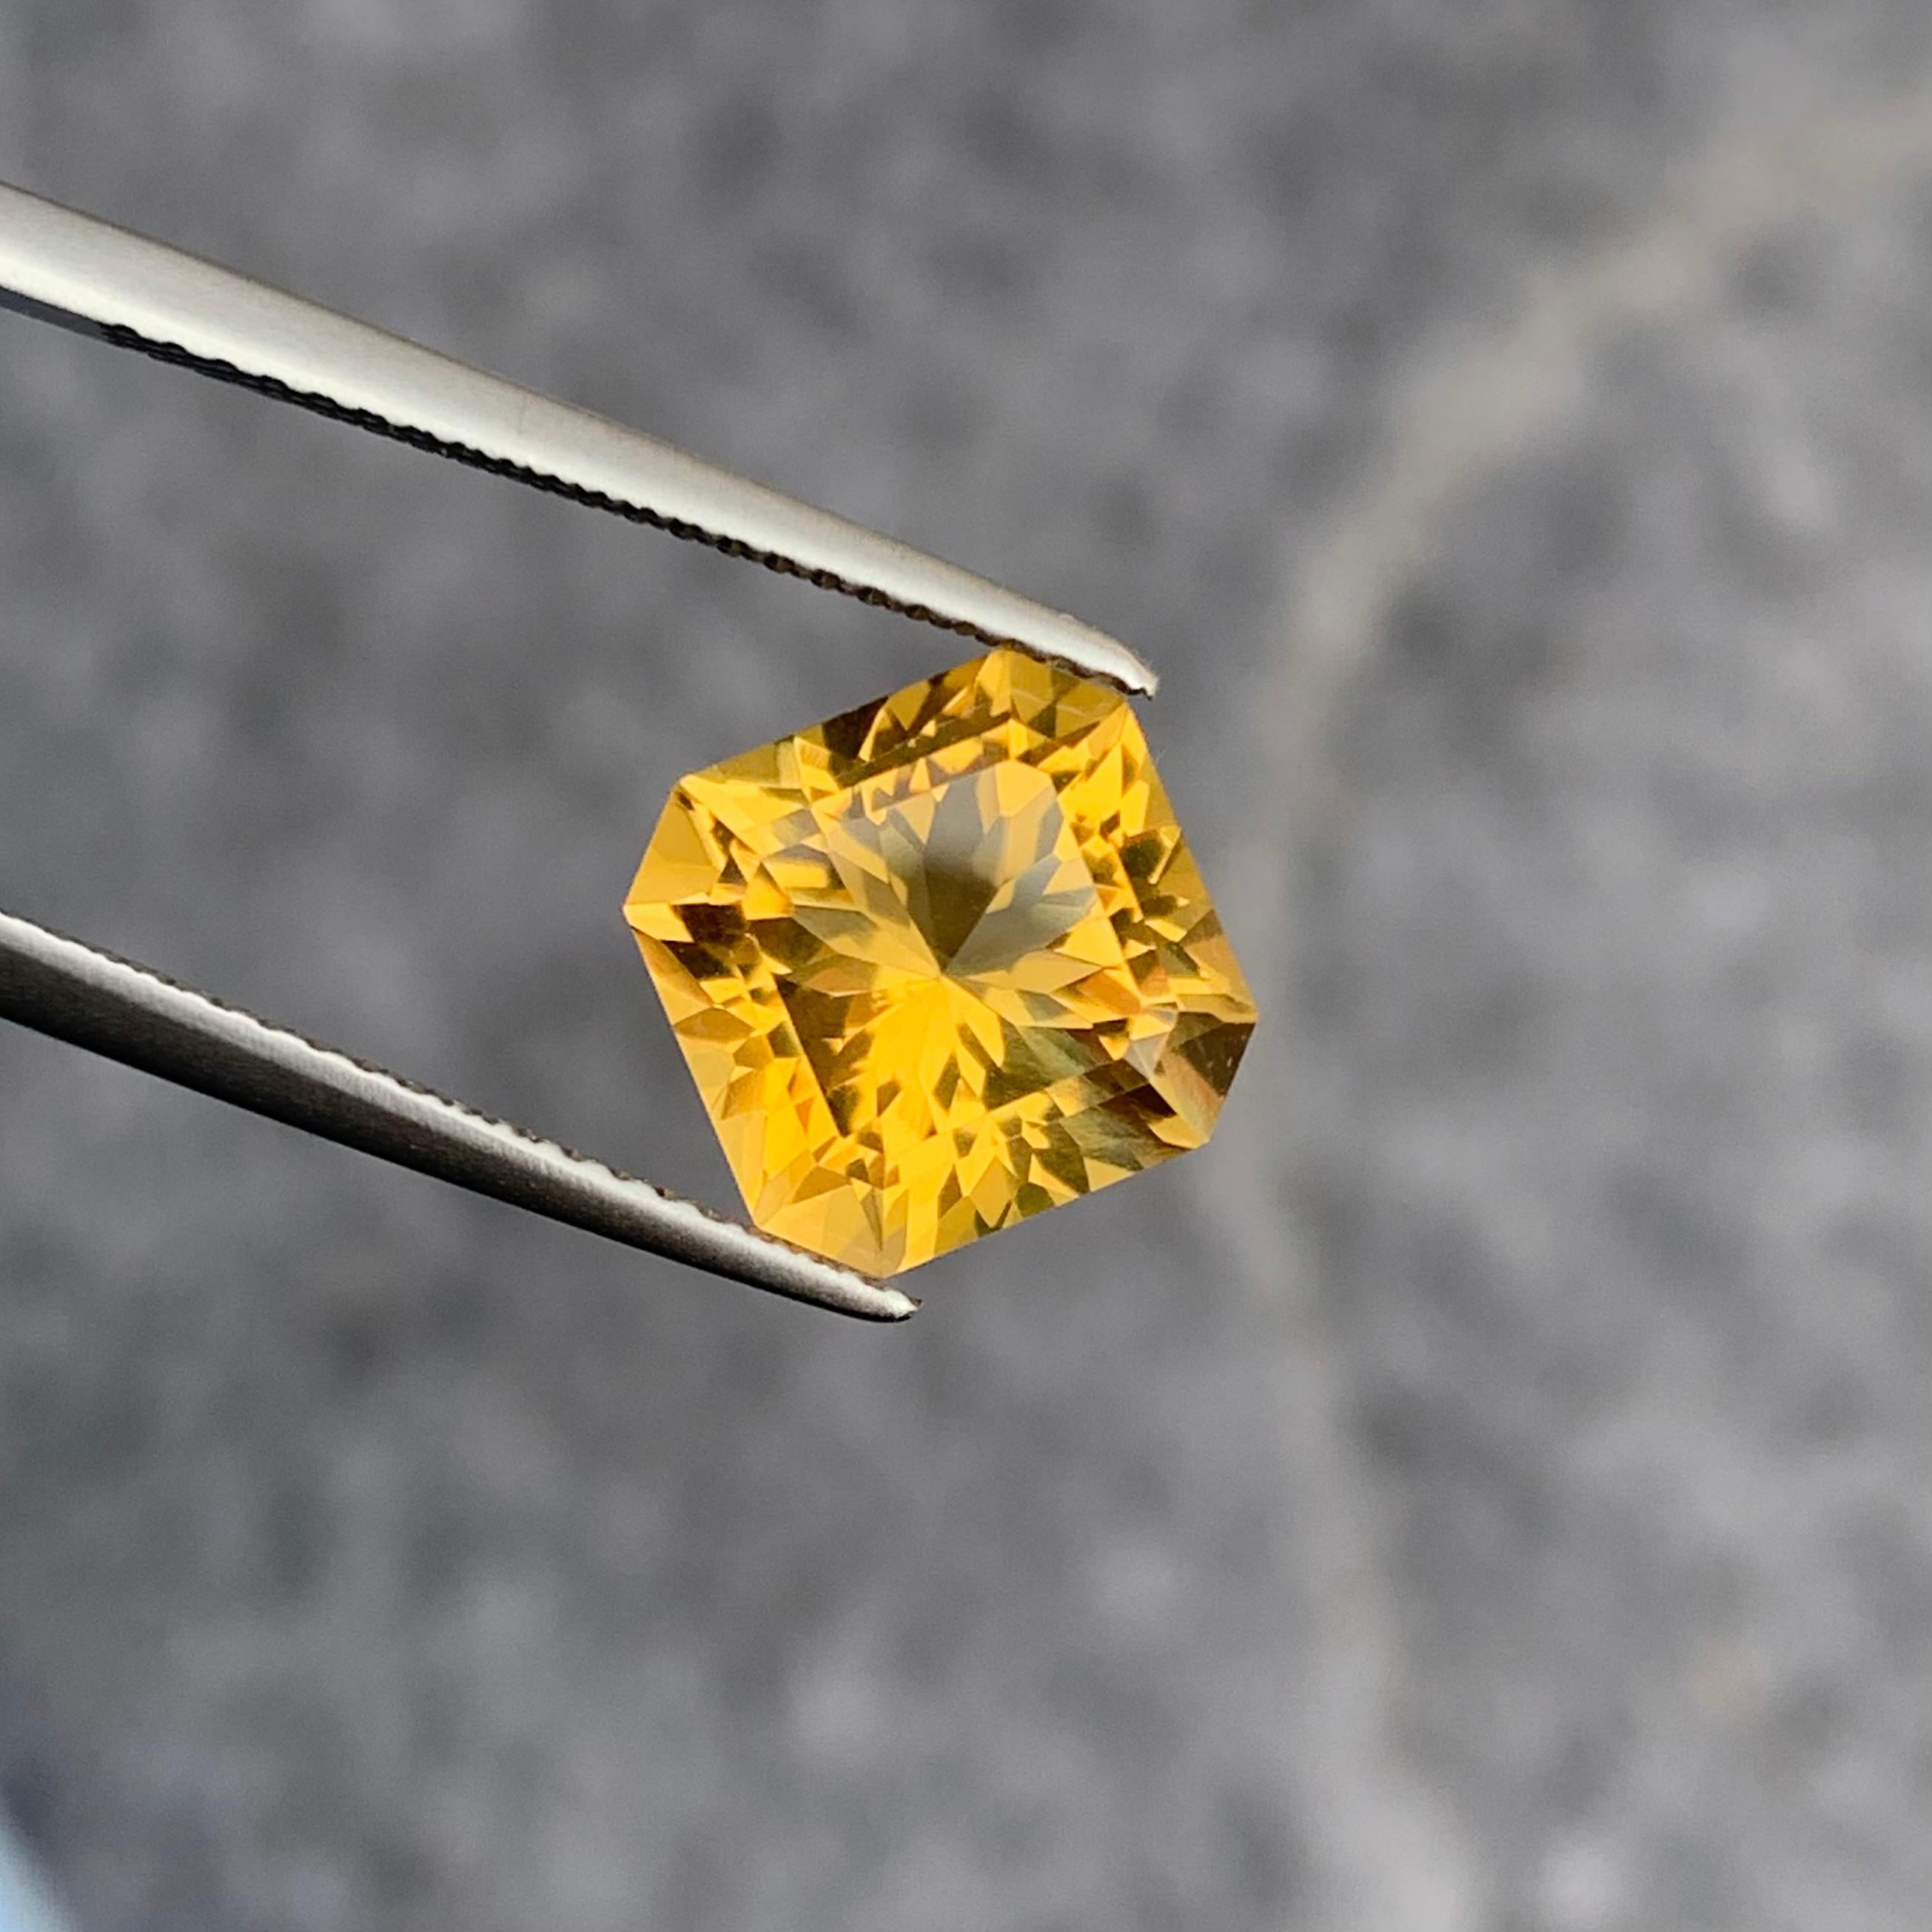 Square Cut Gorgeous Flower Cut Faceted Yellow Citrine 3.80 Carat From Brazil For Sale